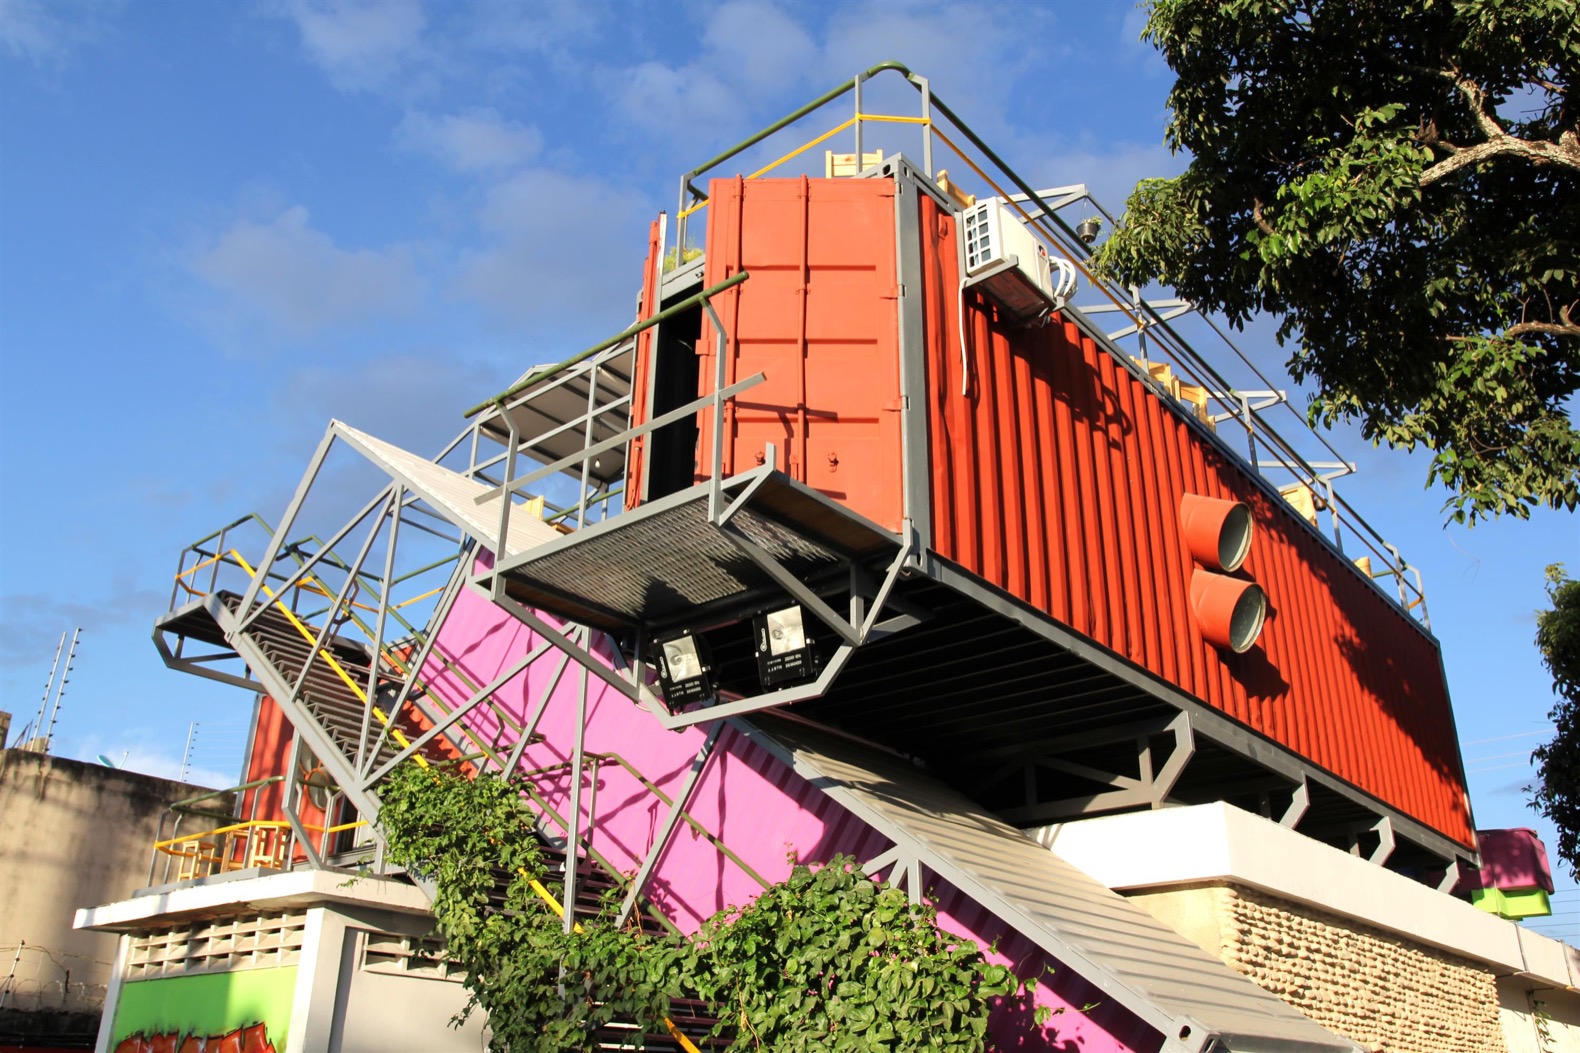 Colorful shipping container architecture with stairs and trees